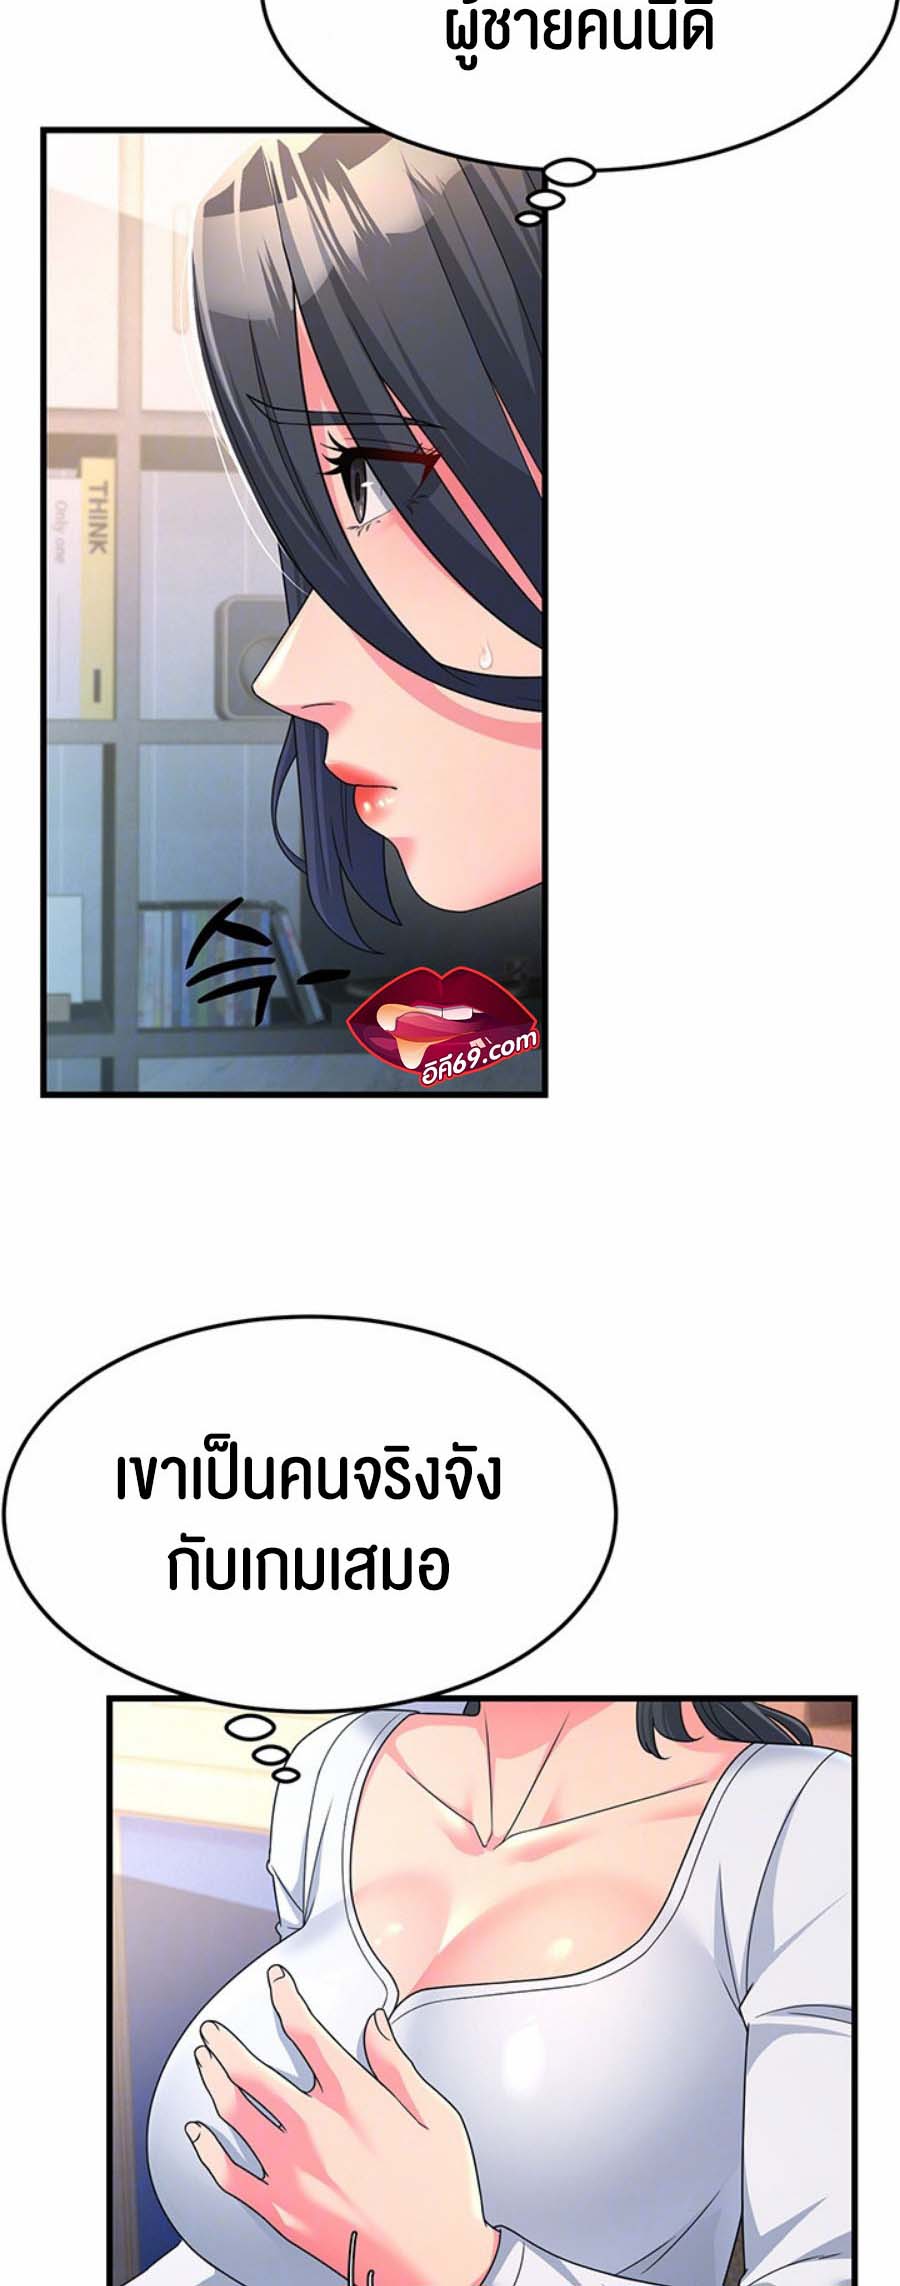 à¸­à¹ˆà¸²à¸™à¹‚à¸”à¸ˆà¸´à¸™ à¹€à¸£à¸·à¹ˆà¸­à¸‡ Mother in Law Bends To My Will 8 10